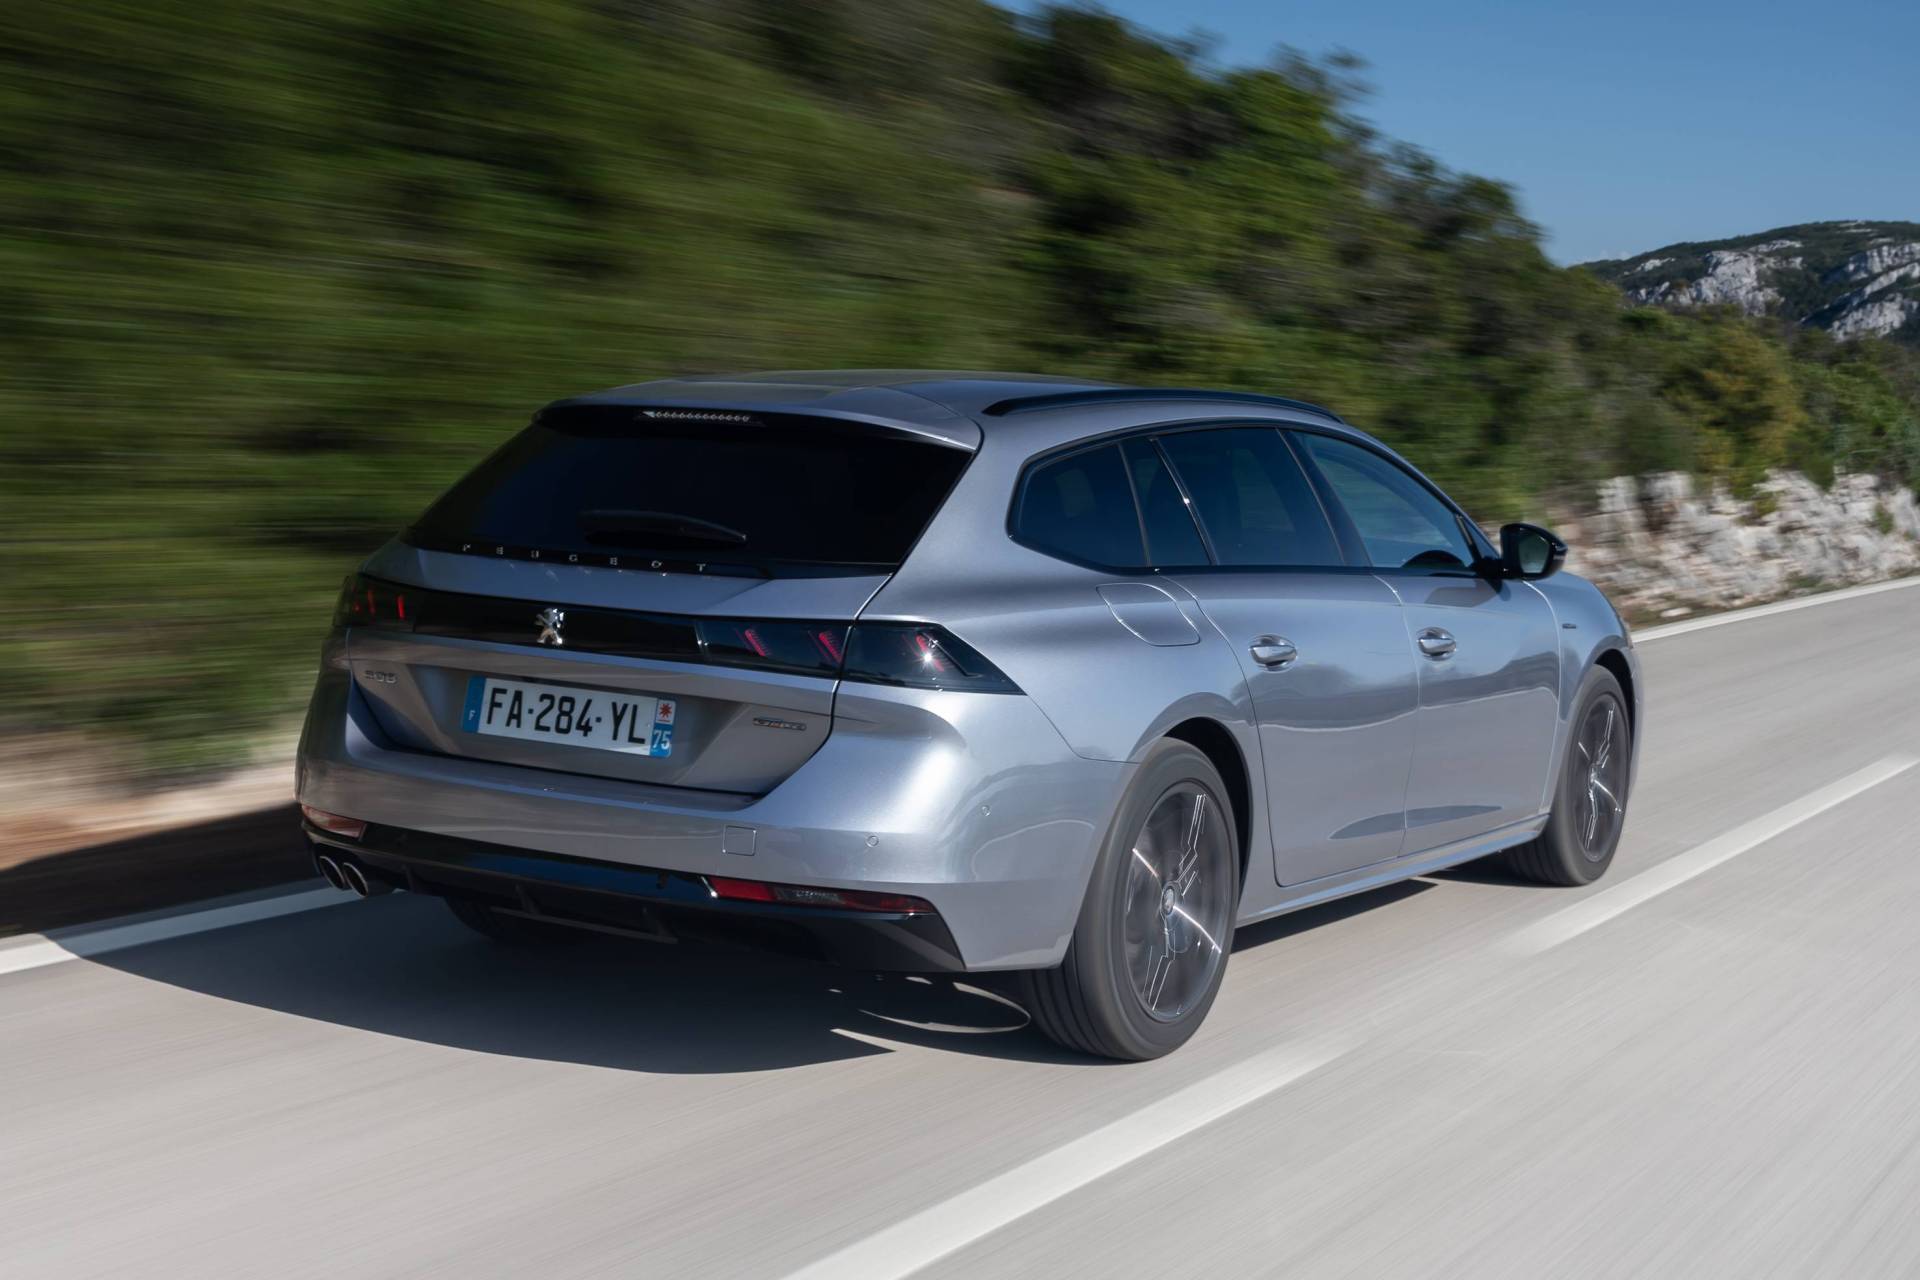 2019 Peugeot 508 Sw On Sale In The Uk In Four Grades Starts At £26845